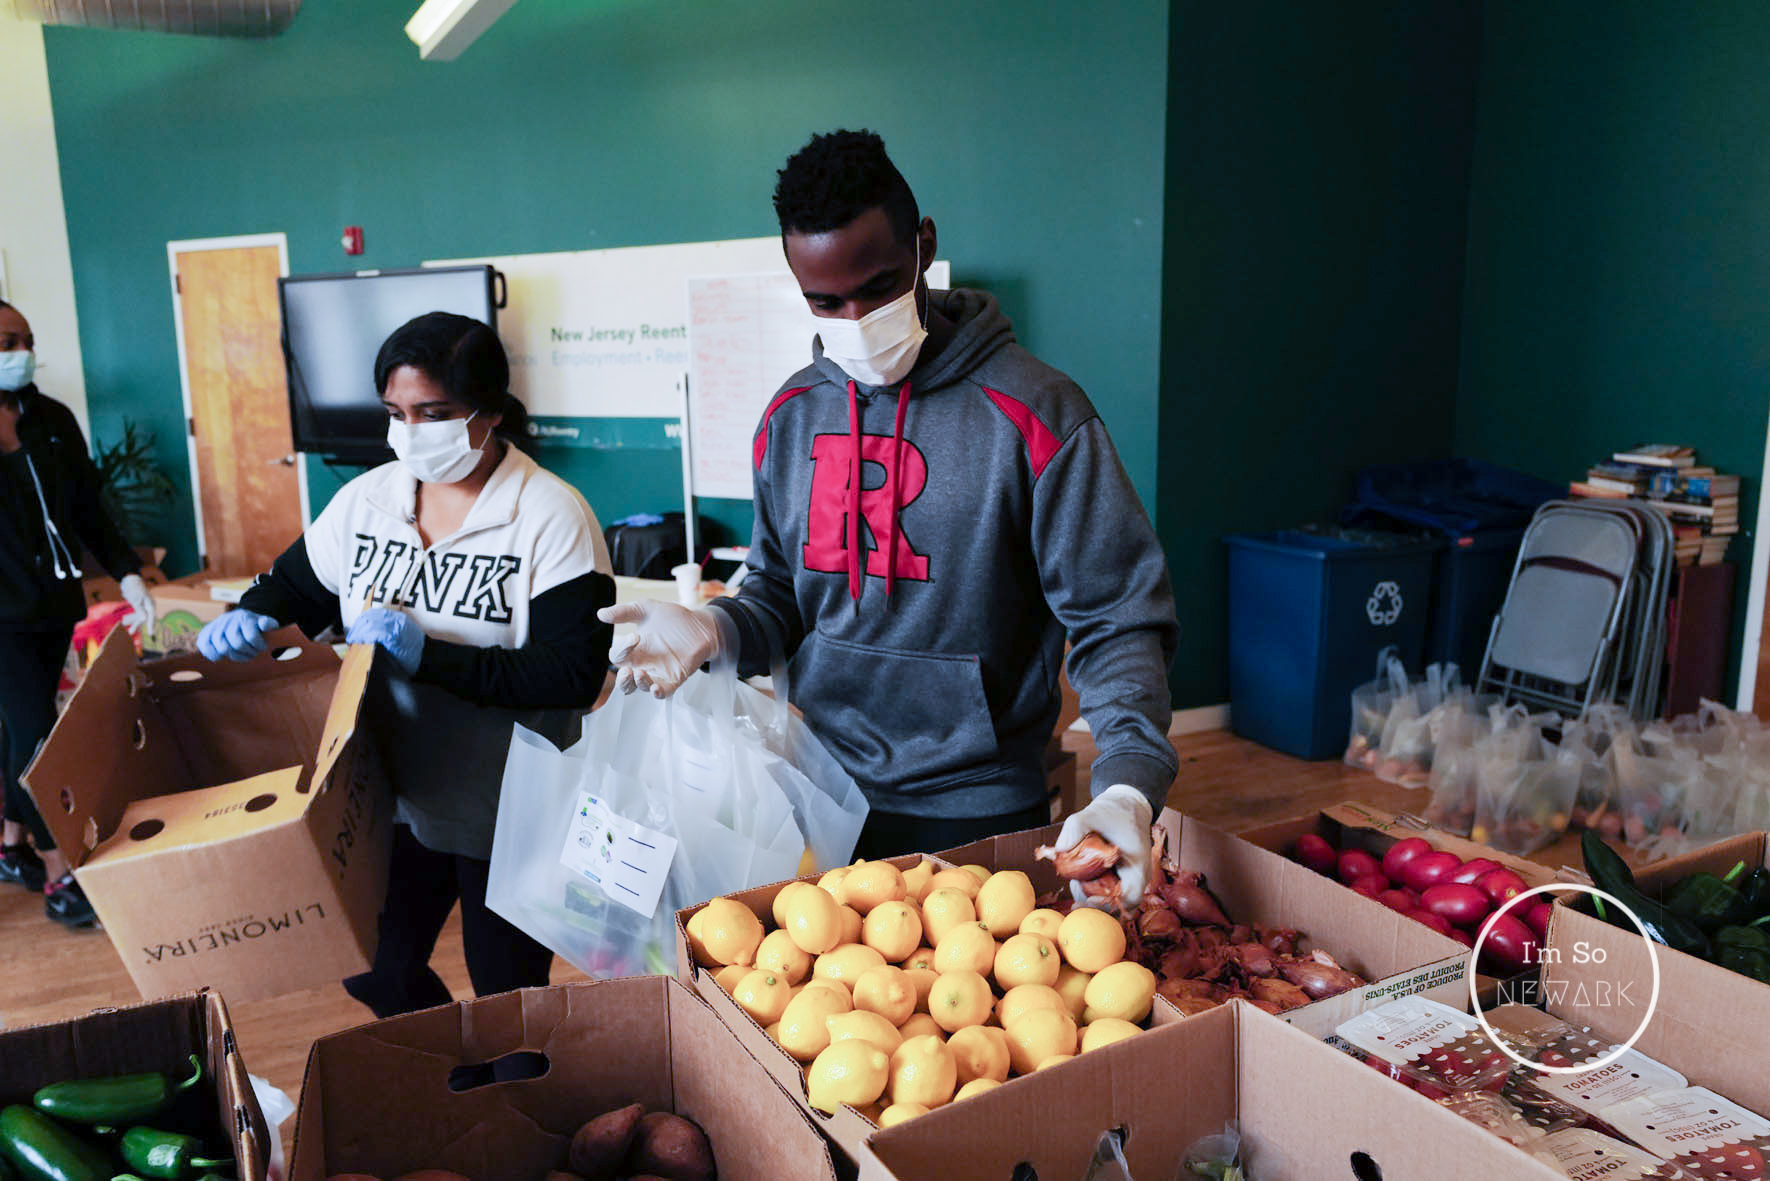 Rutgers School of Medicine student helping bag and deliver groceries to those in need during Covid19 pandemic. Newark NJ